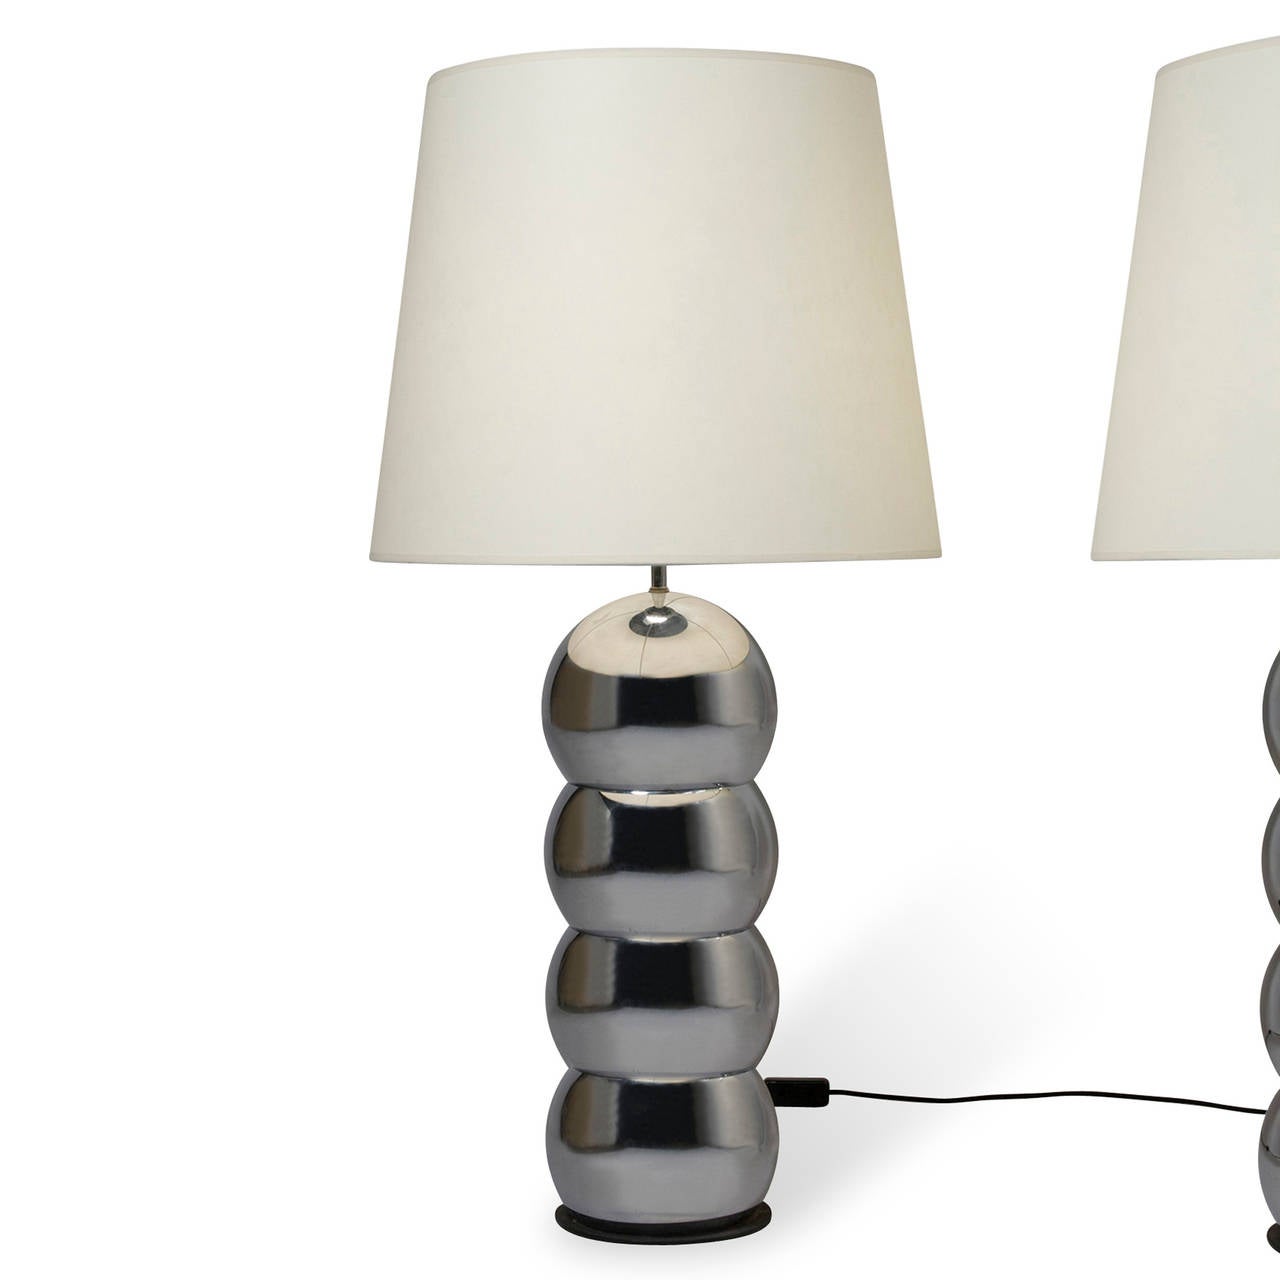 Pair of Chrome Table Lamps In Excellent Condition For Sale In Brooklyn, NY